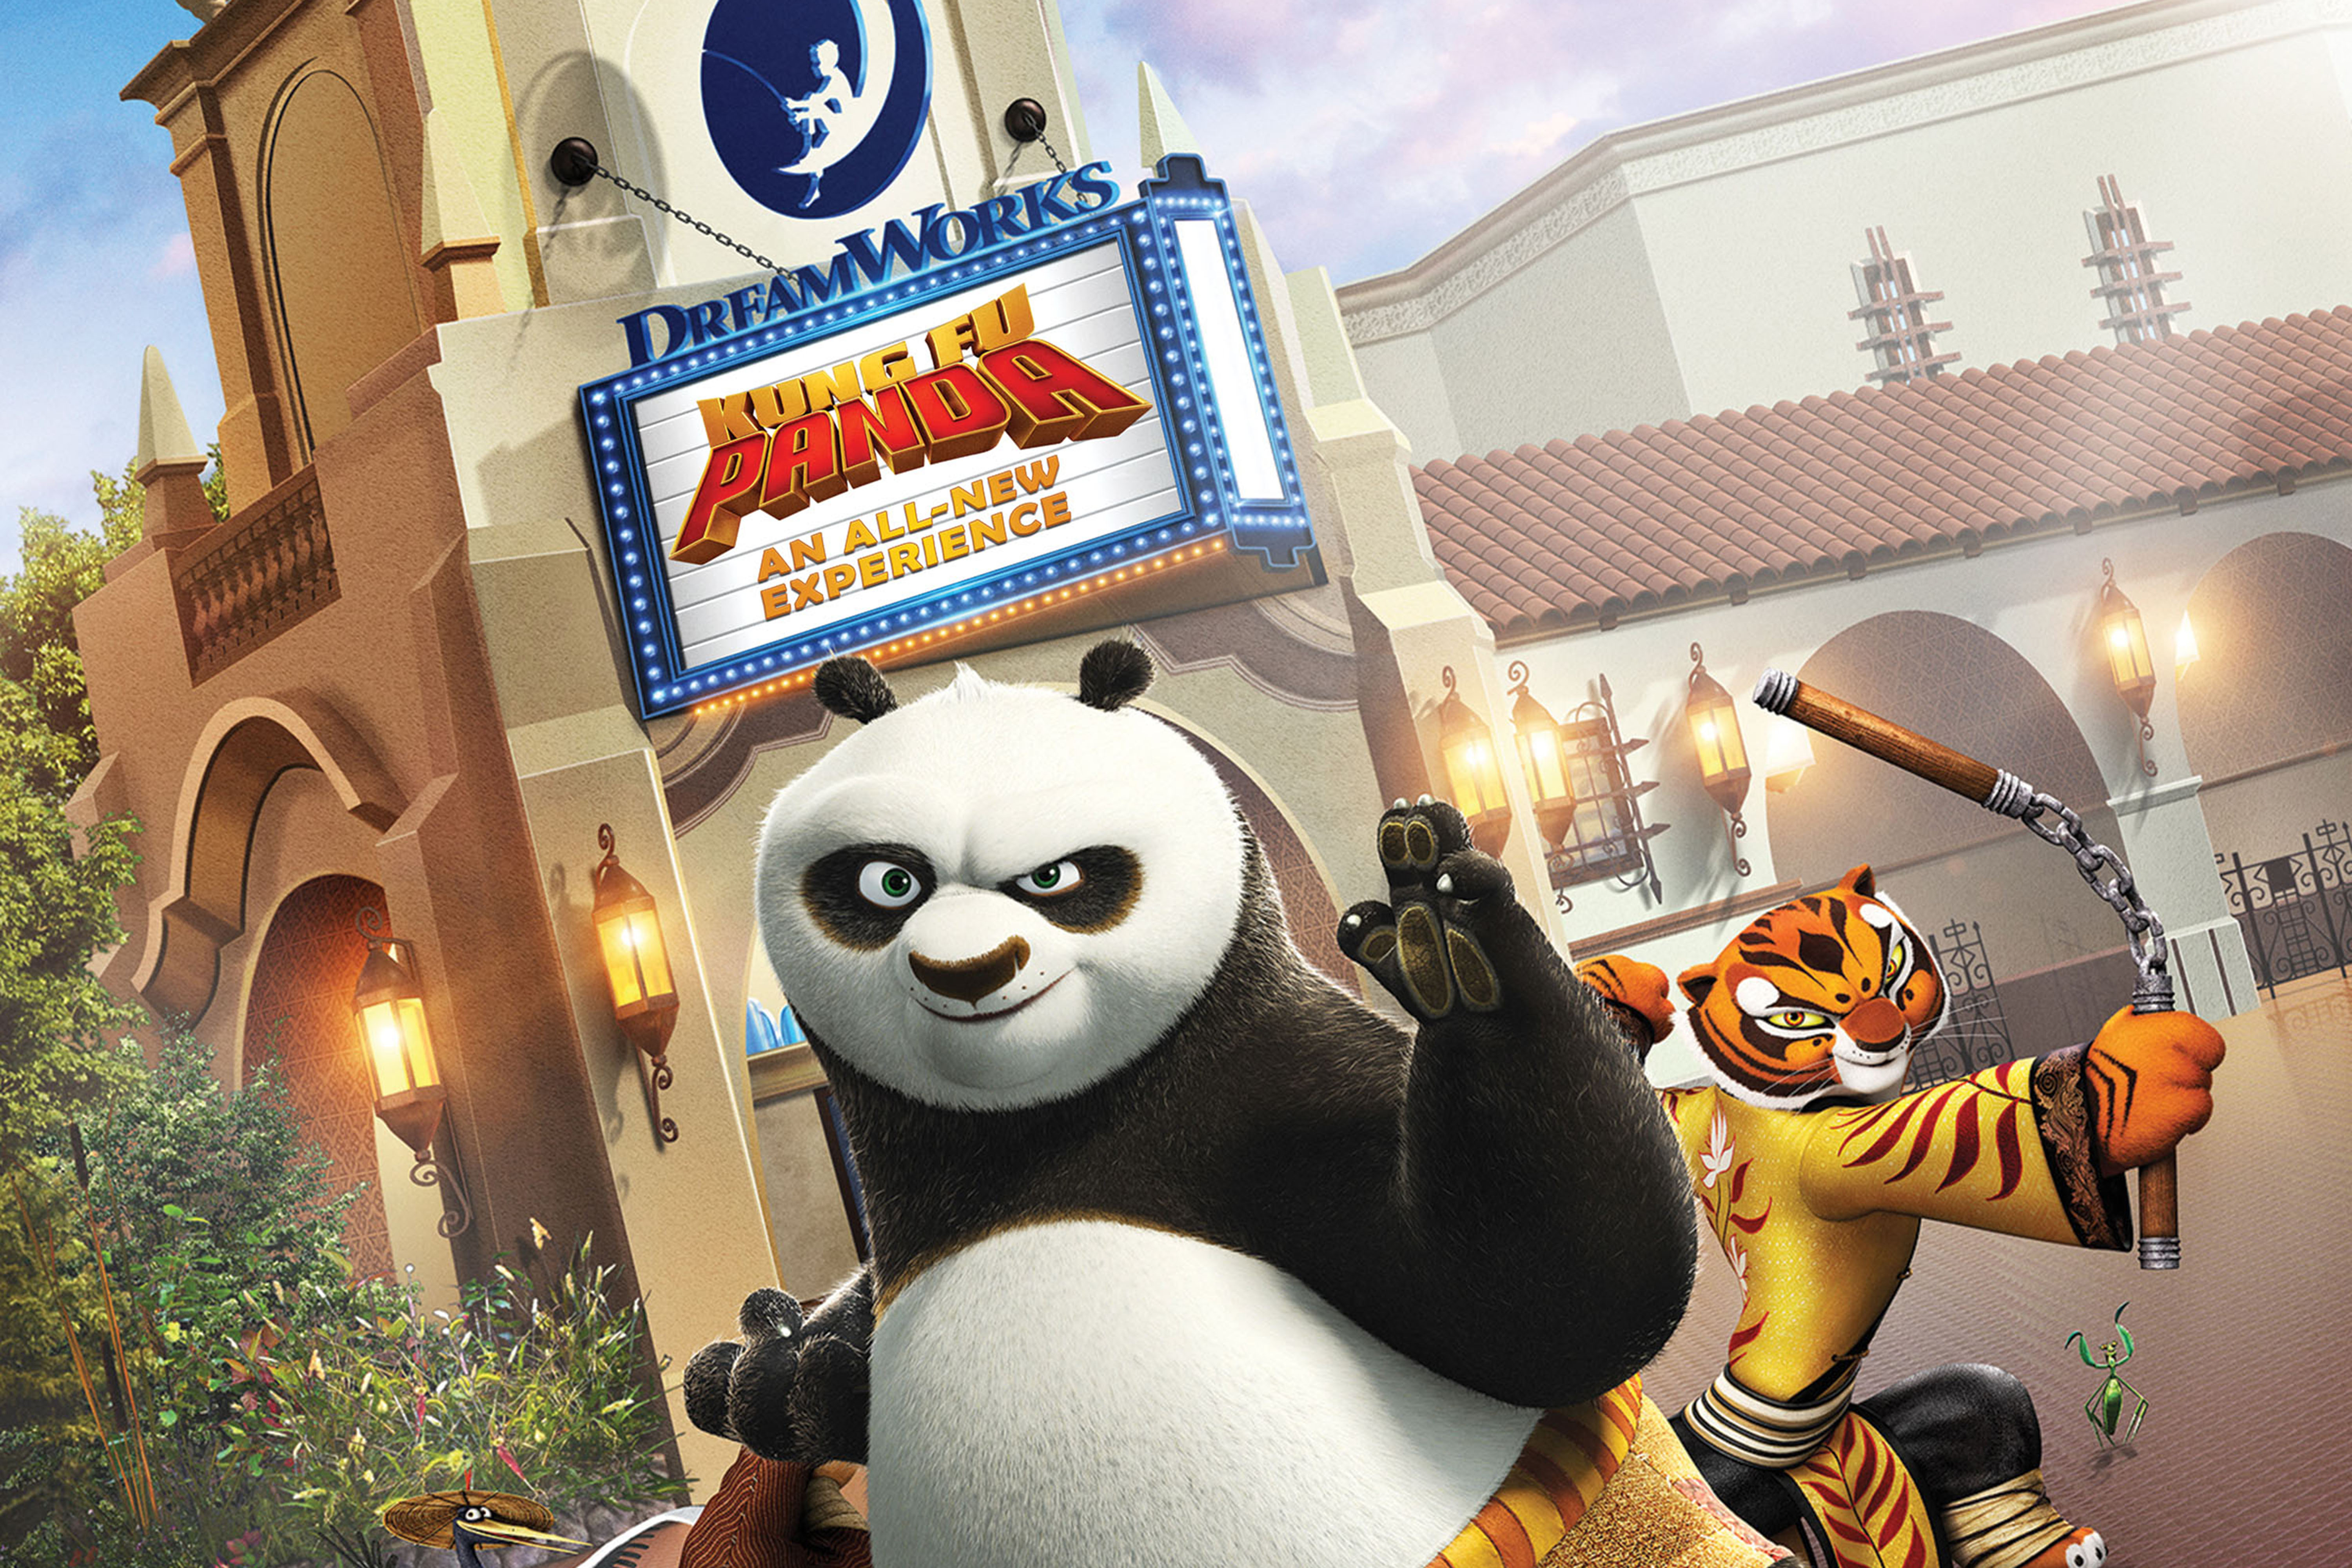 DreamWorks Theatre attraction featuring Kung Fu Panda coming to ...